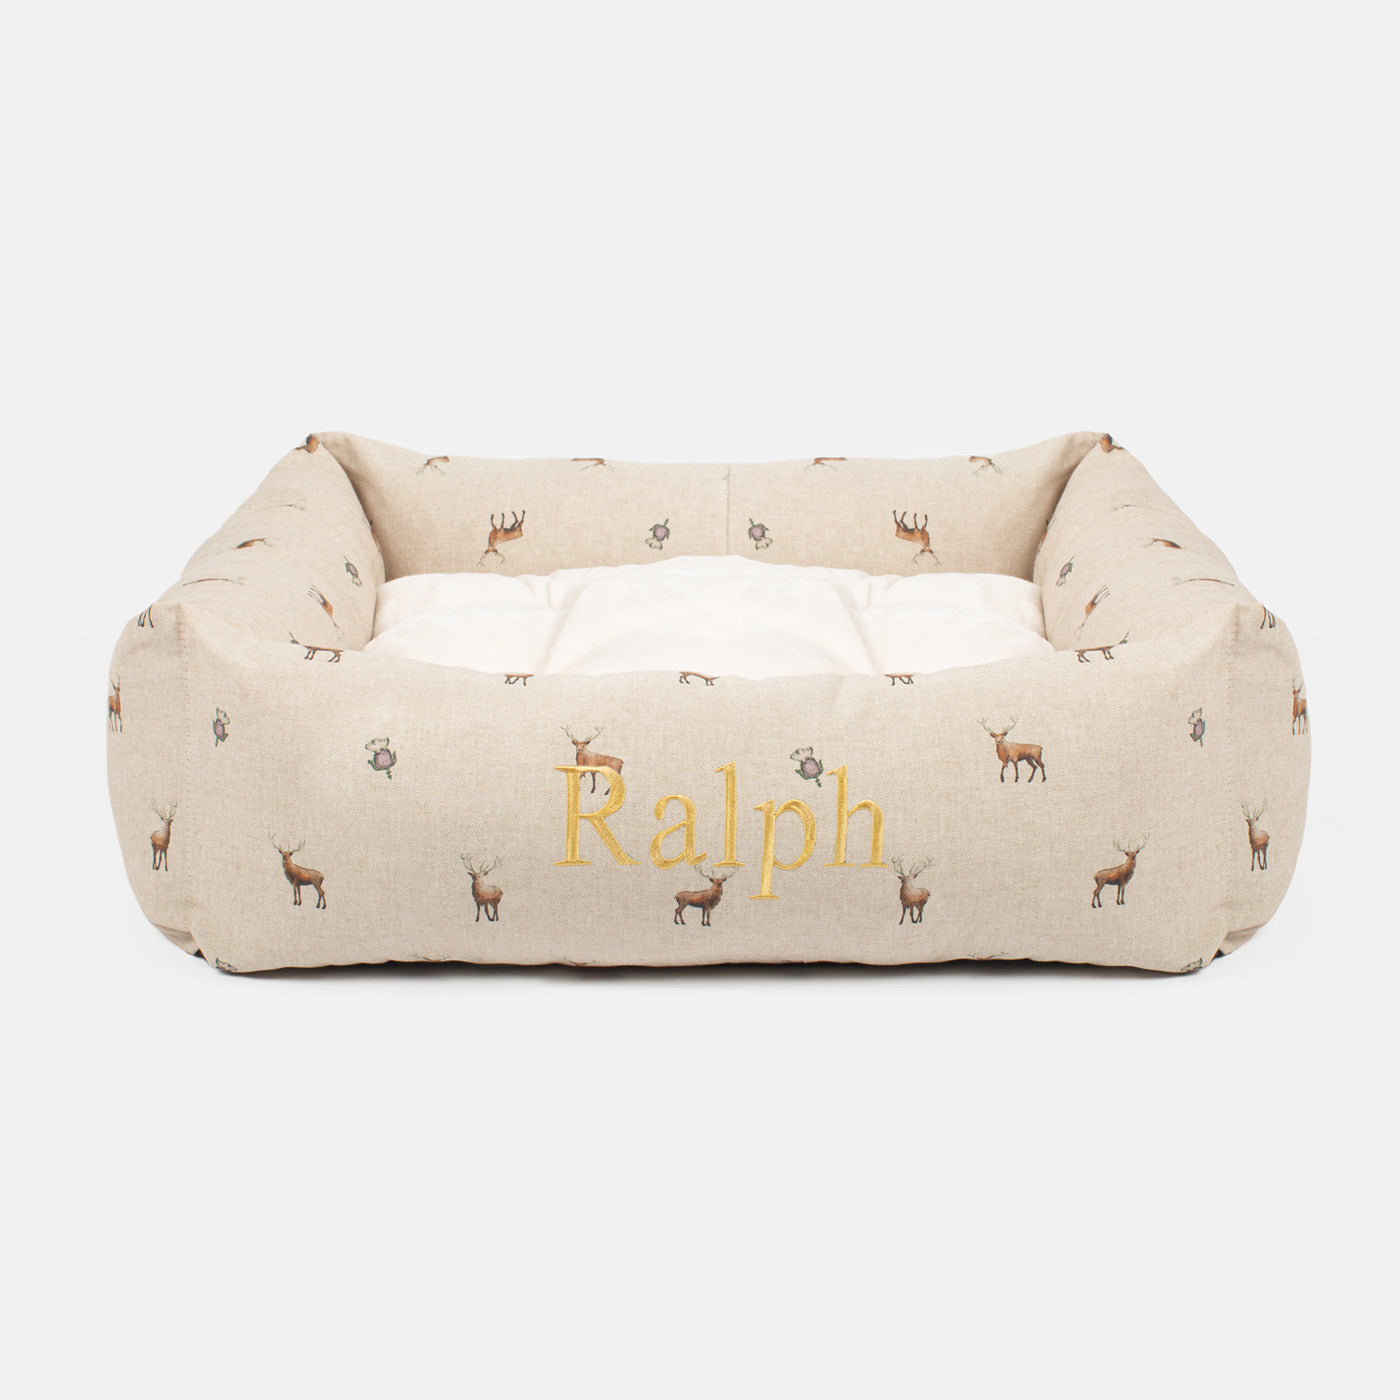 [color:woodland stag] Luxury Handmade Box Bed For Dogs in Woodlands, in Woodland Stag. Perfect For Your Pets Nap Time! Available To Personalize at Lords & Labradors US